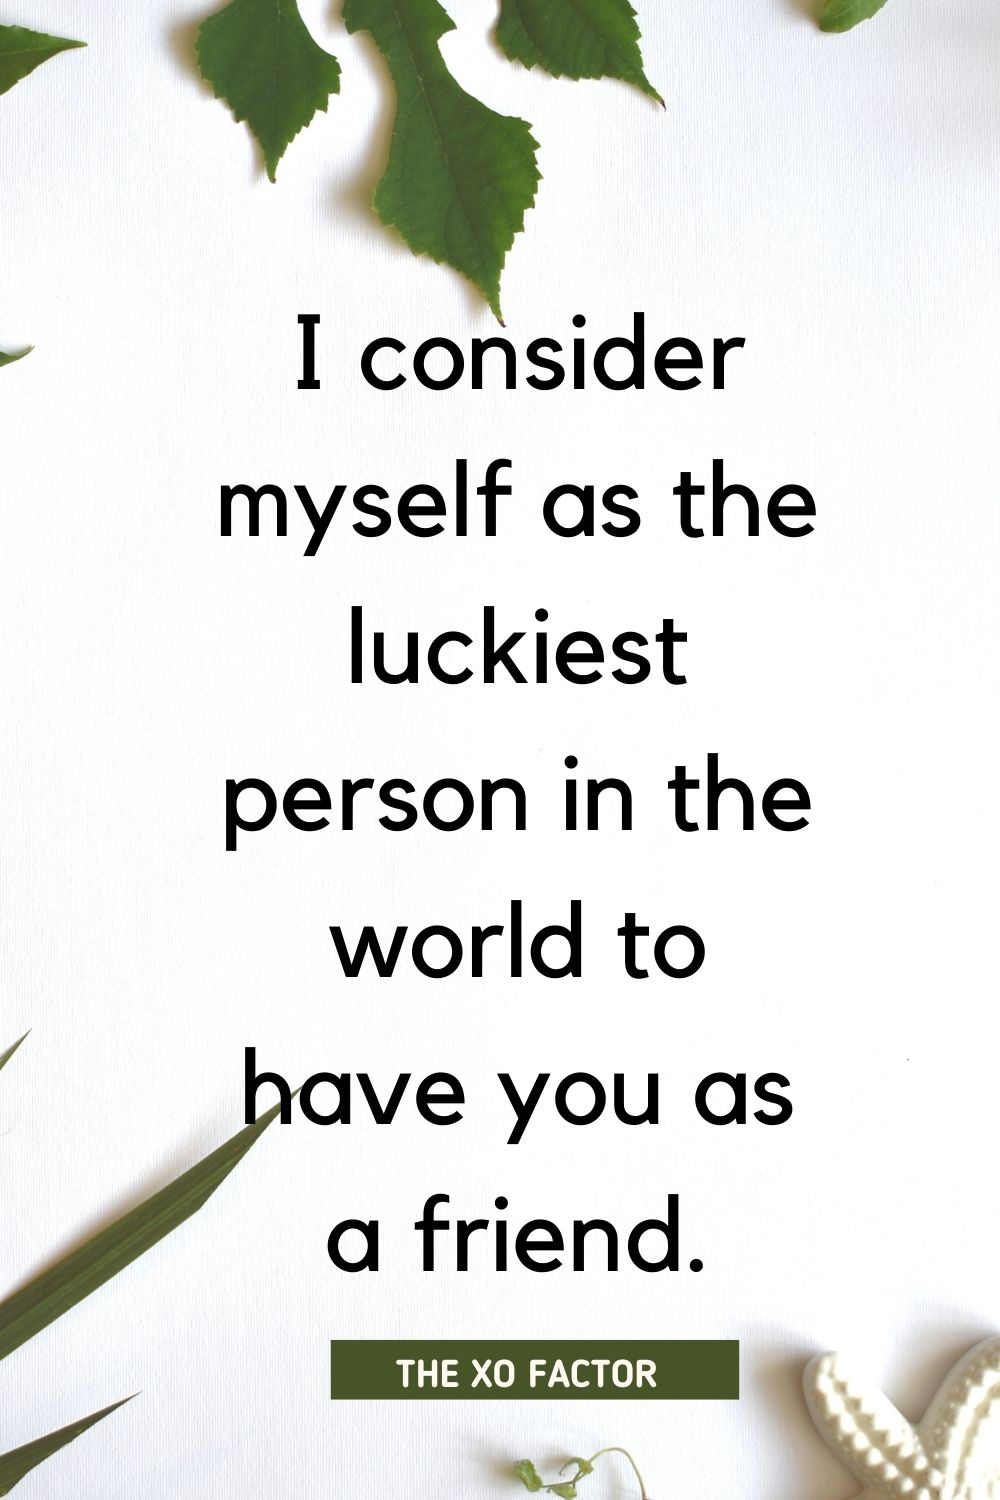 I consider myself as the luckiest person in the world to have you as a friend.